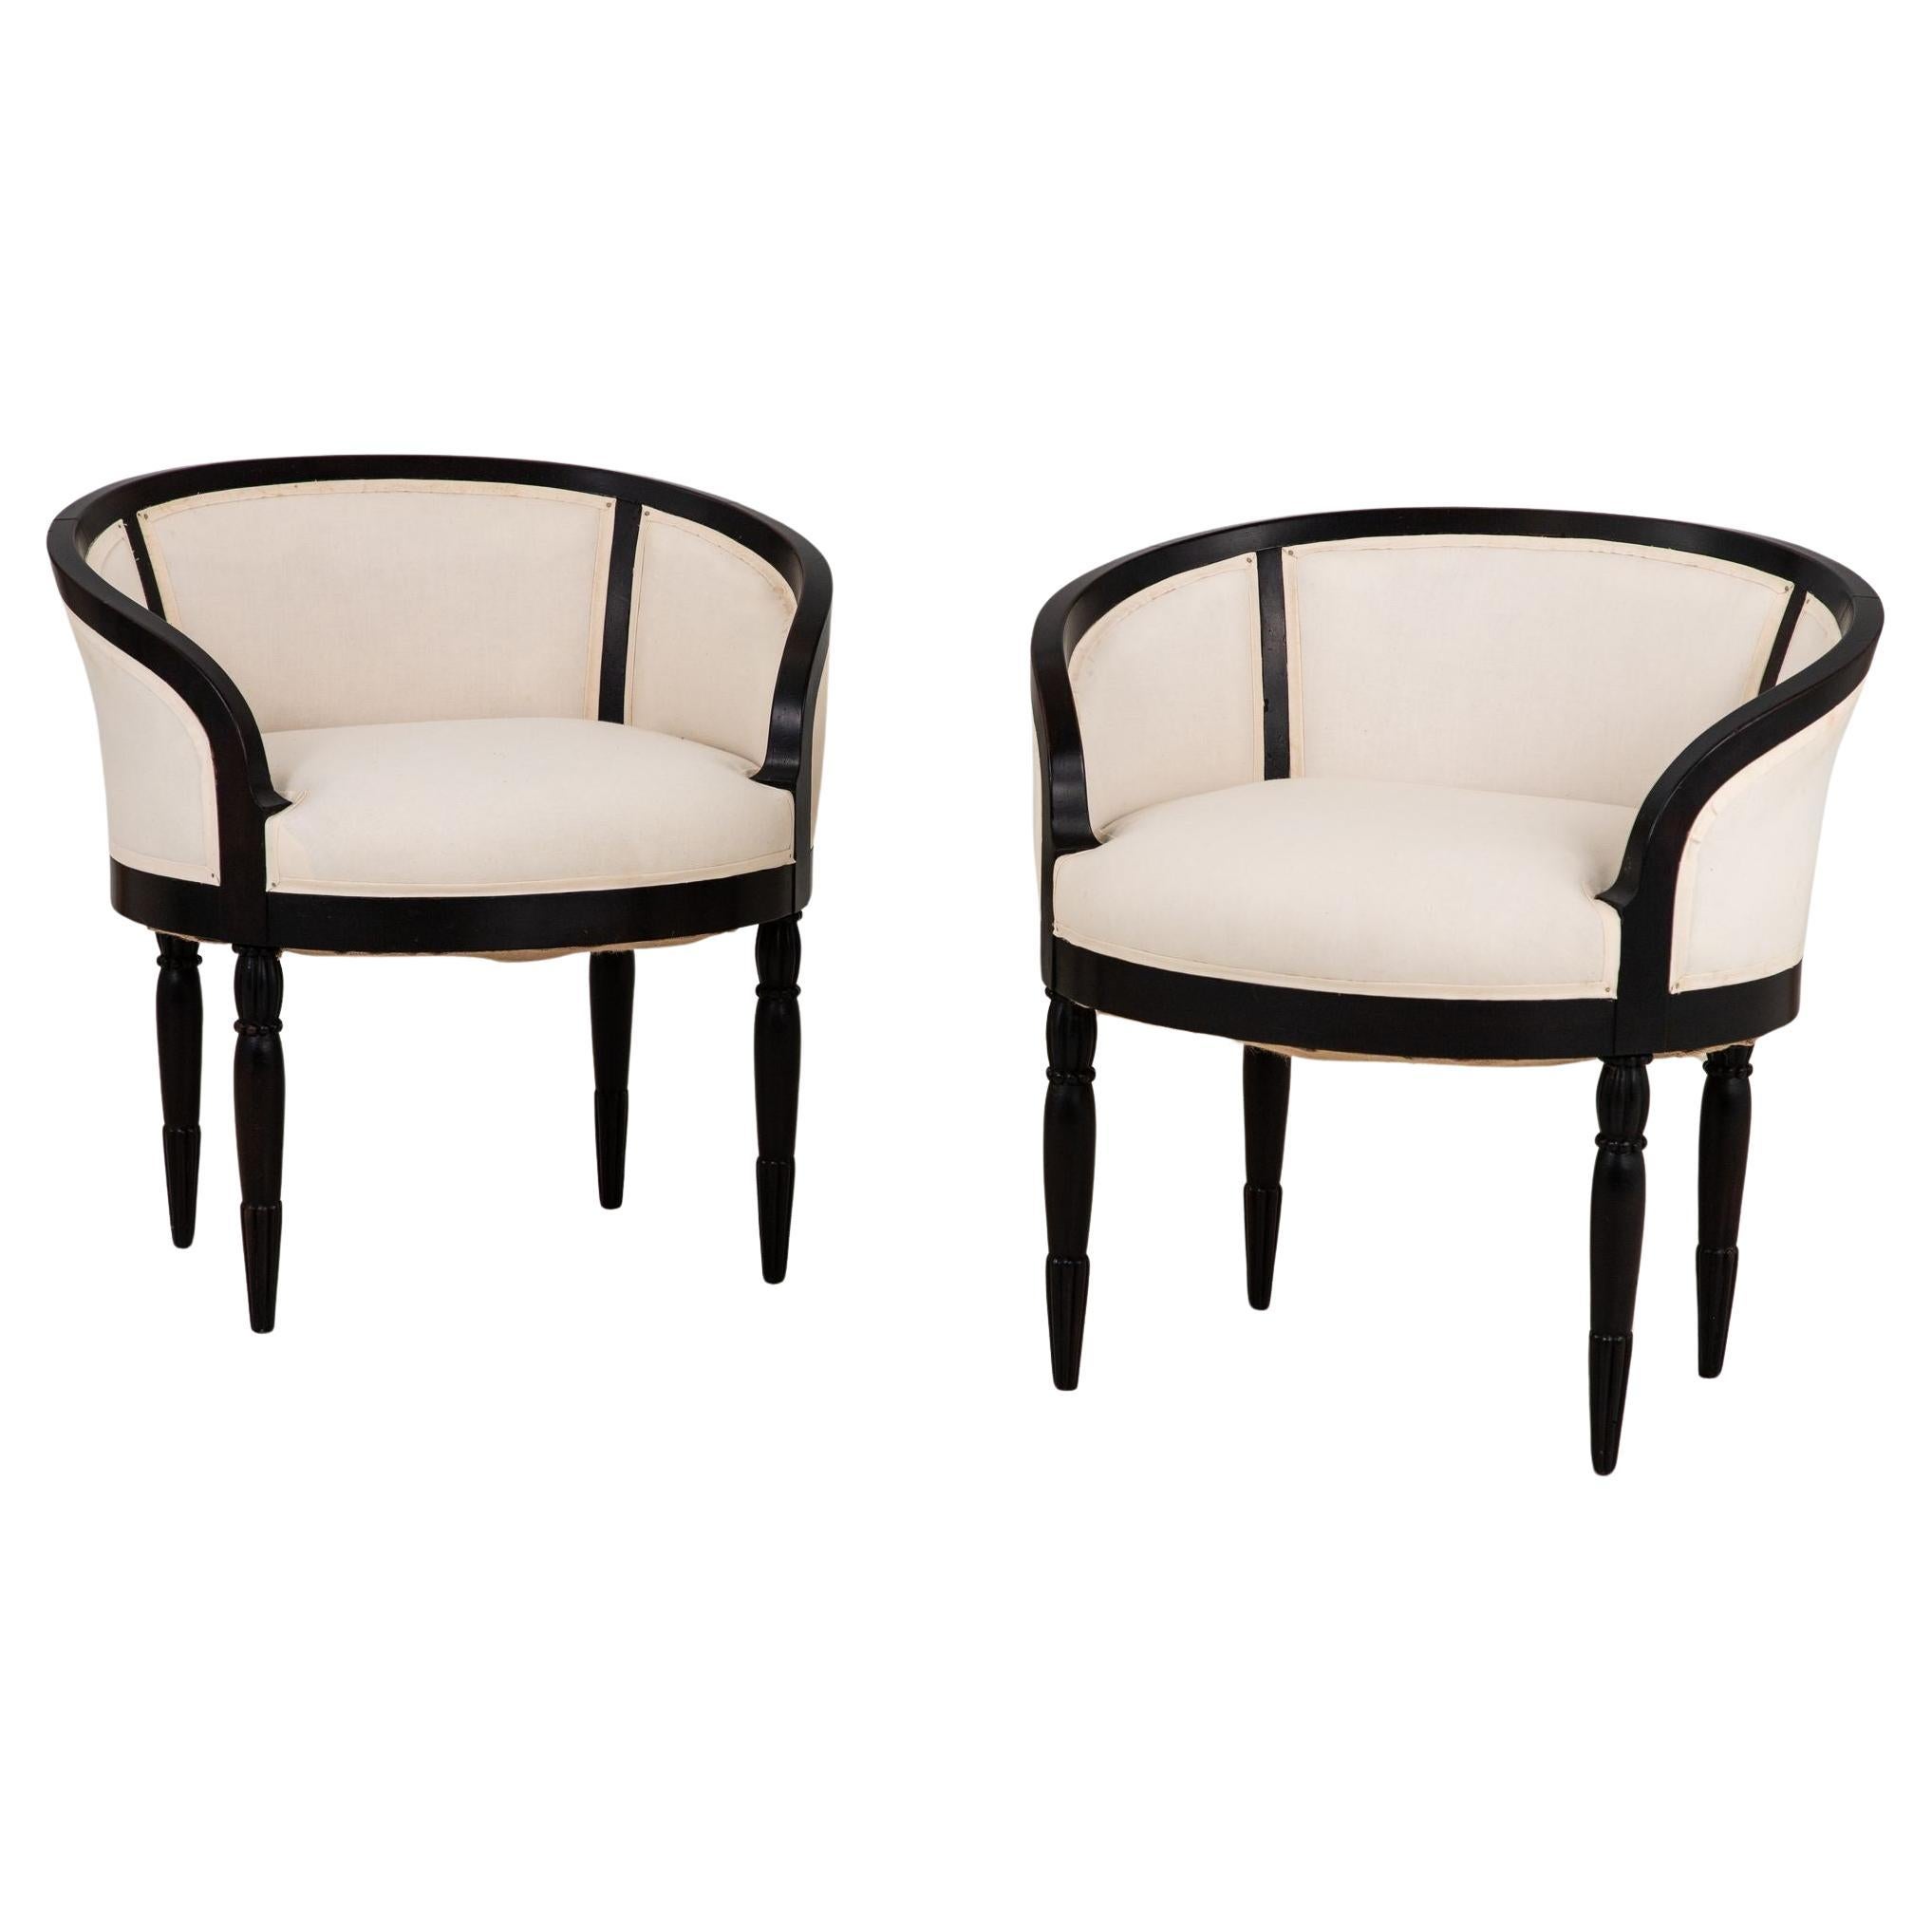 Pair French Art Deco Chairs, 1930s For Sale